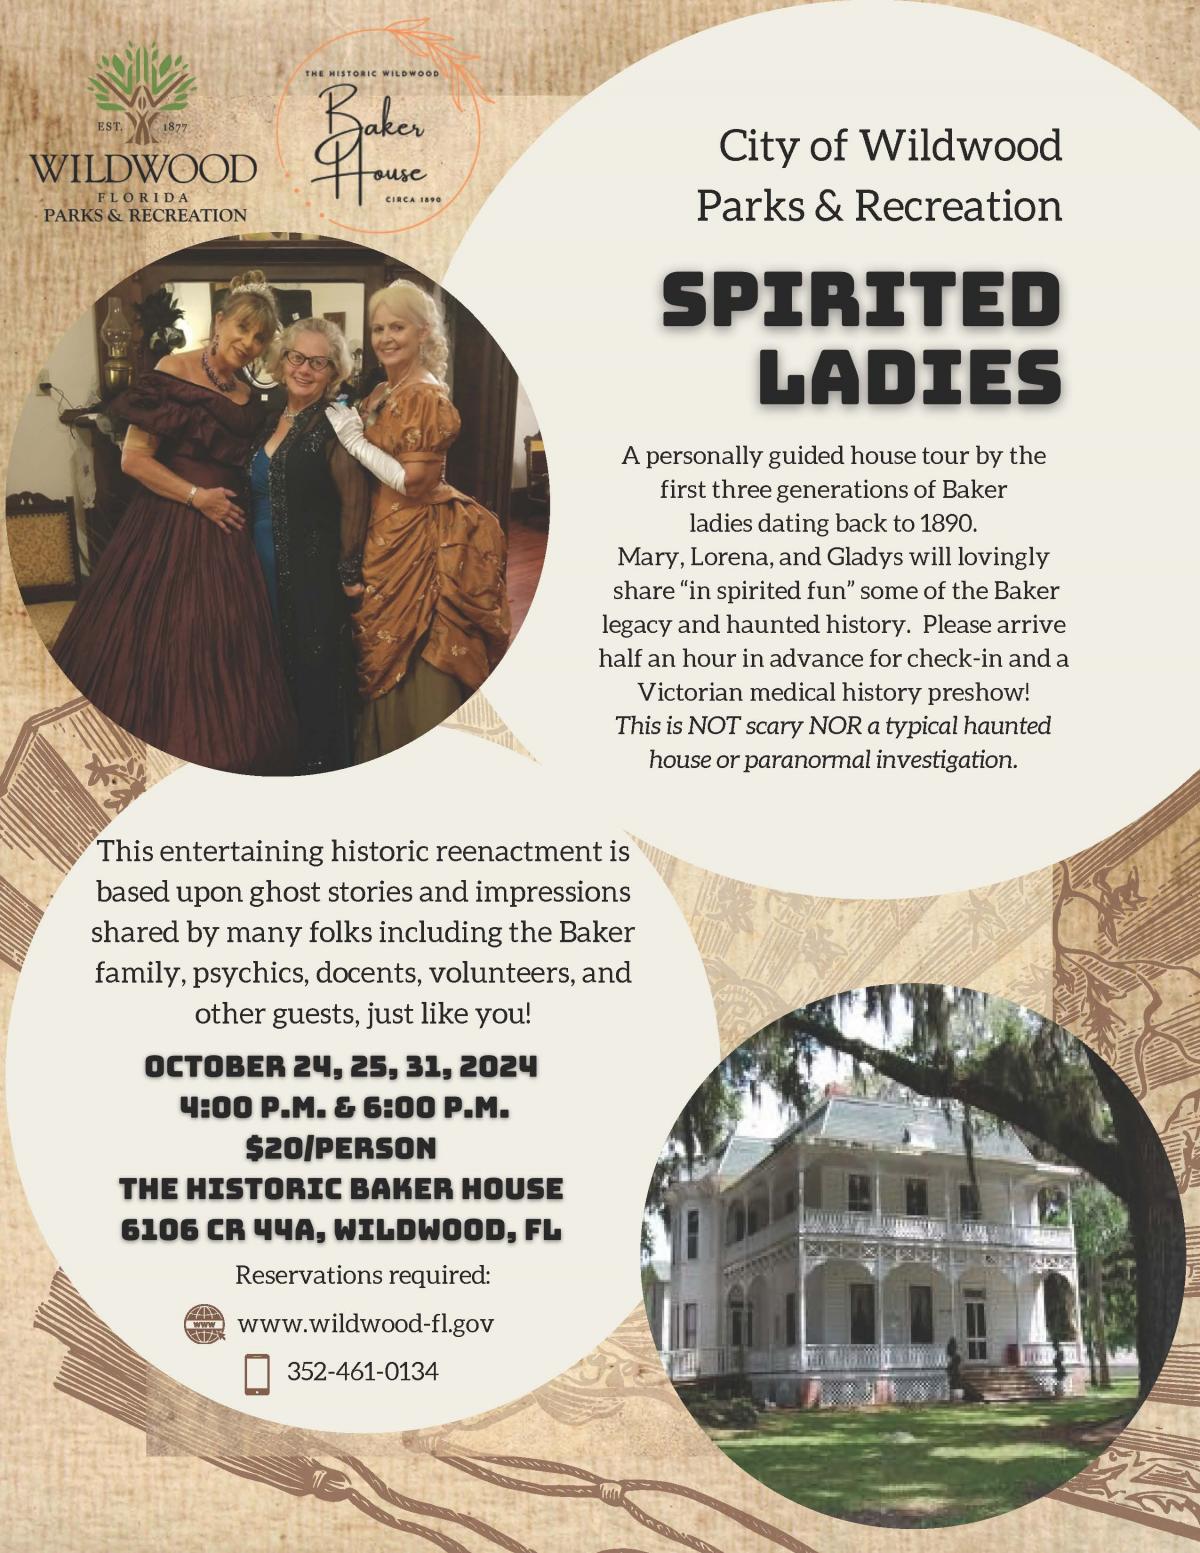 Spirited Ladies Tour, October 24-25, and 31, 2024, Baker House, 6106 CR 44A, Wildwood Fl, 34785, 4:00 p.m. and 6:00 p.m.